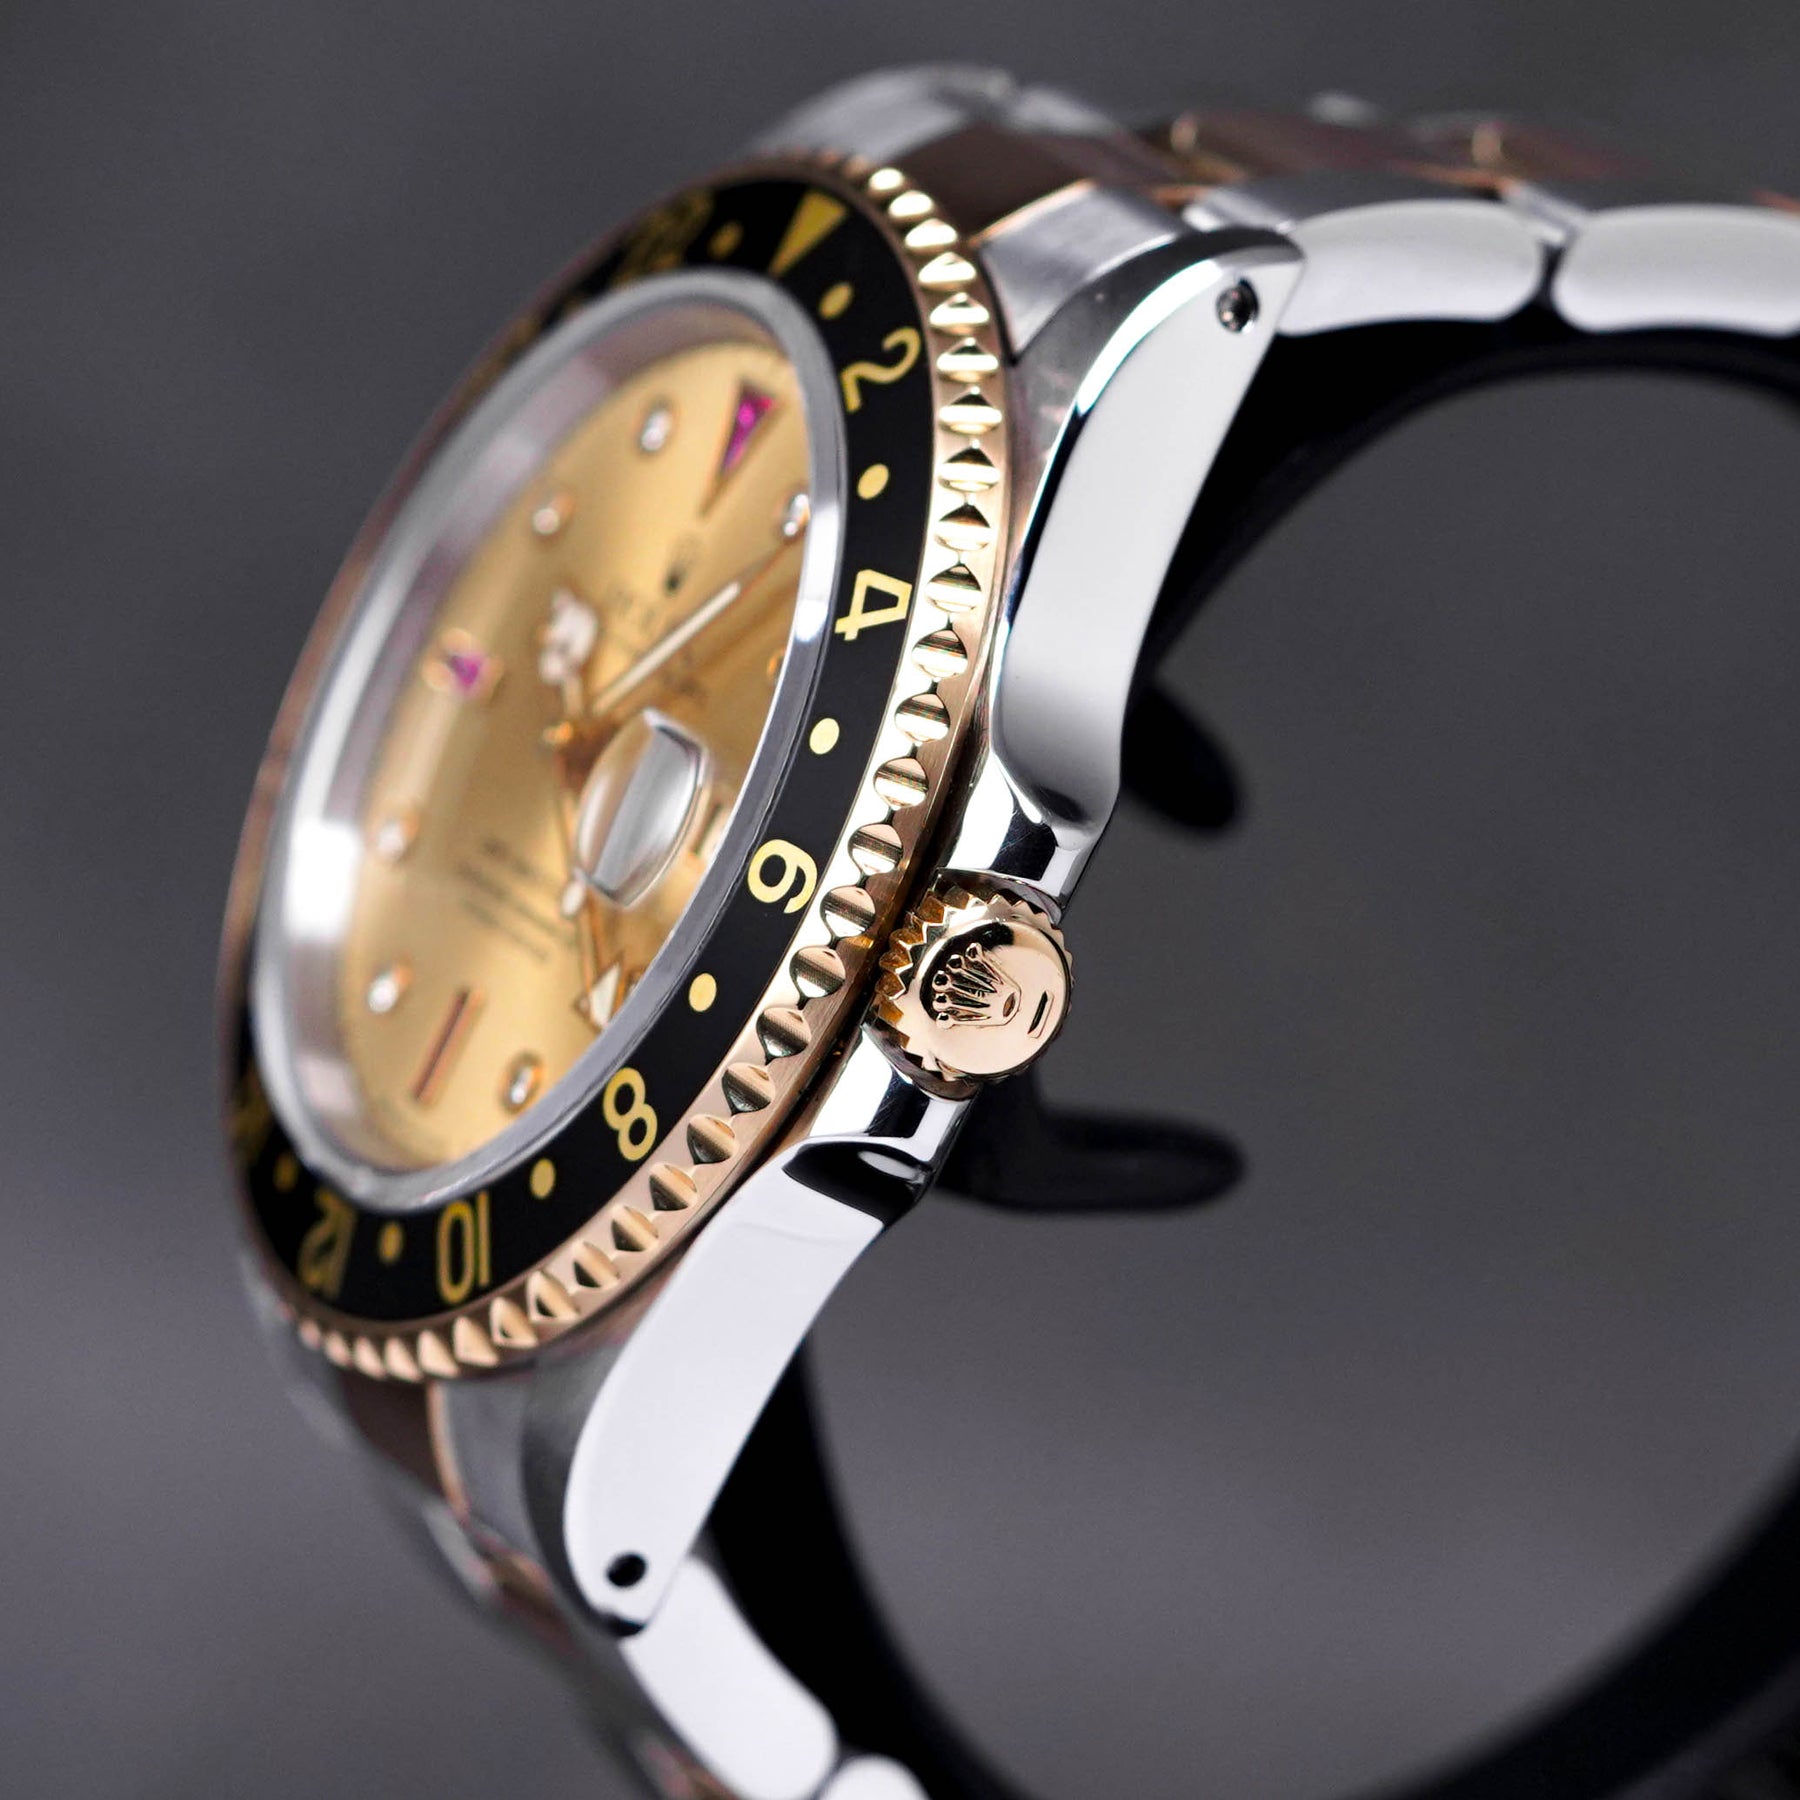 GMT MASTER-II TWOTONE YELLOWGOLD CHAMPAGNE DIAL DIAMOND INDEX WITH RUBY 'S SERIES' (CIRCA 1993)